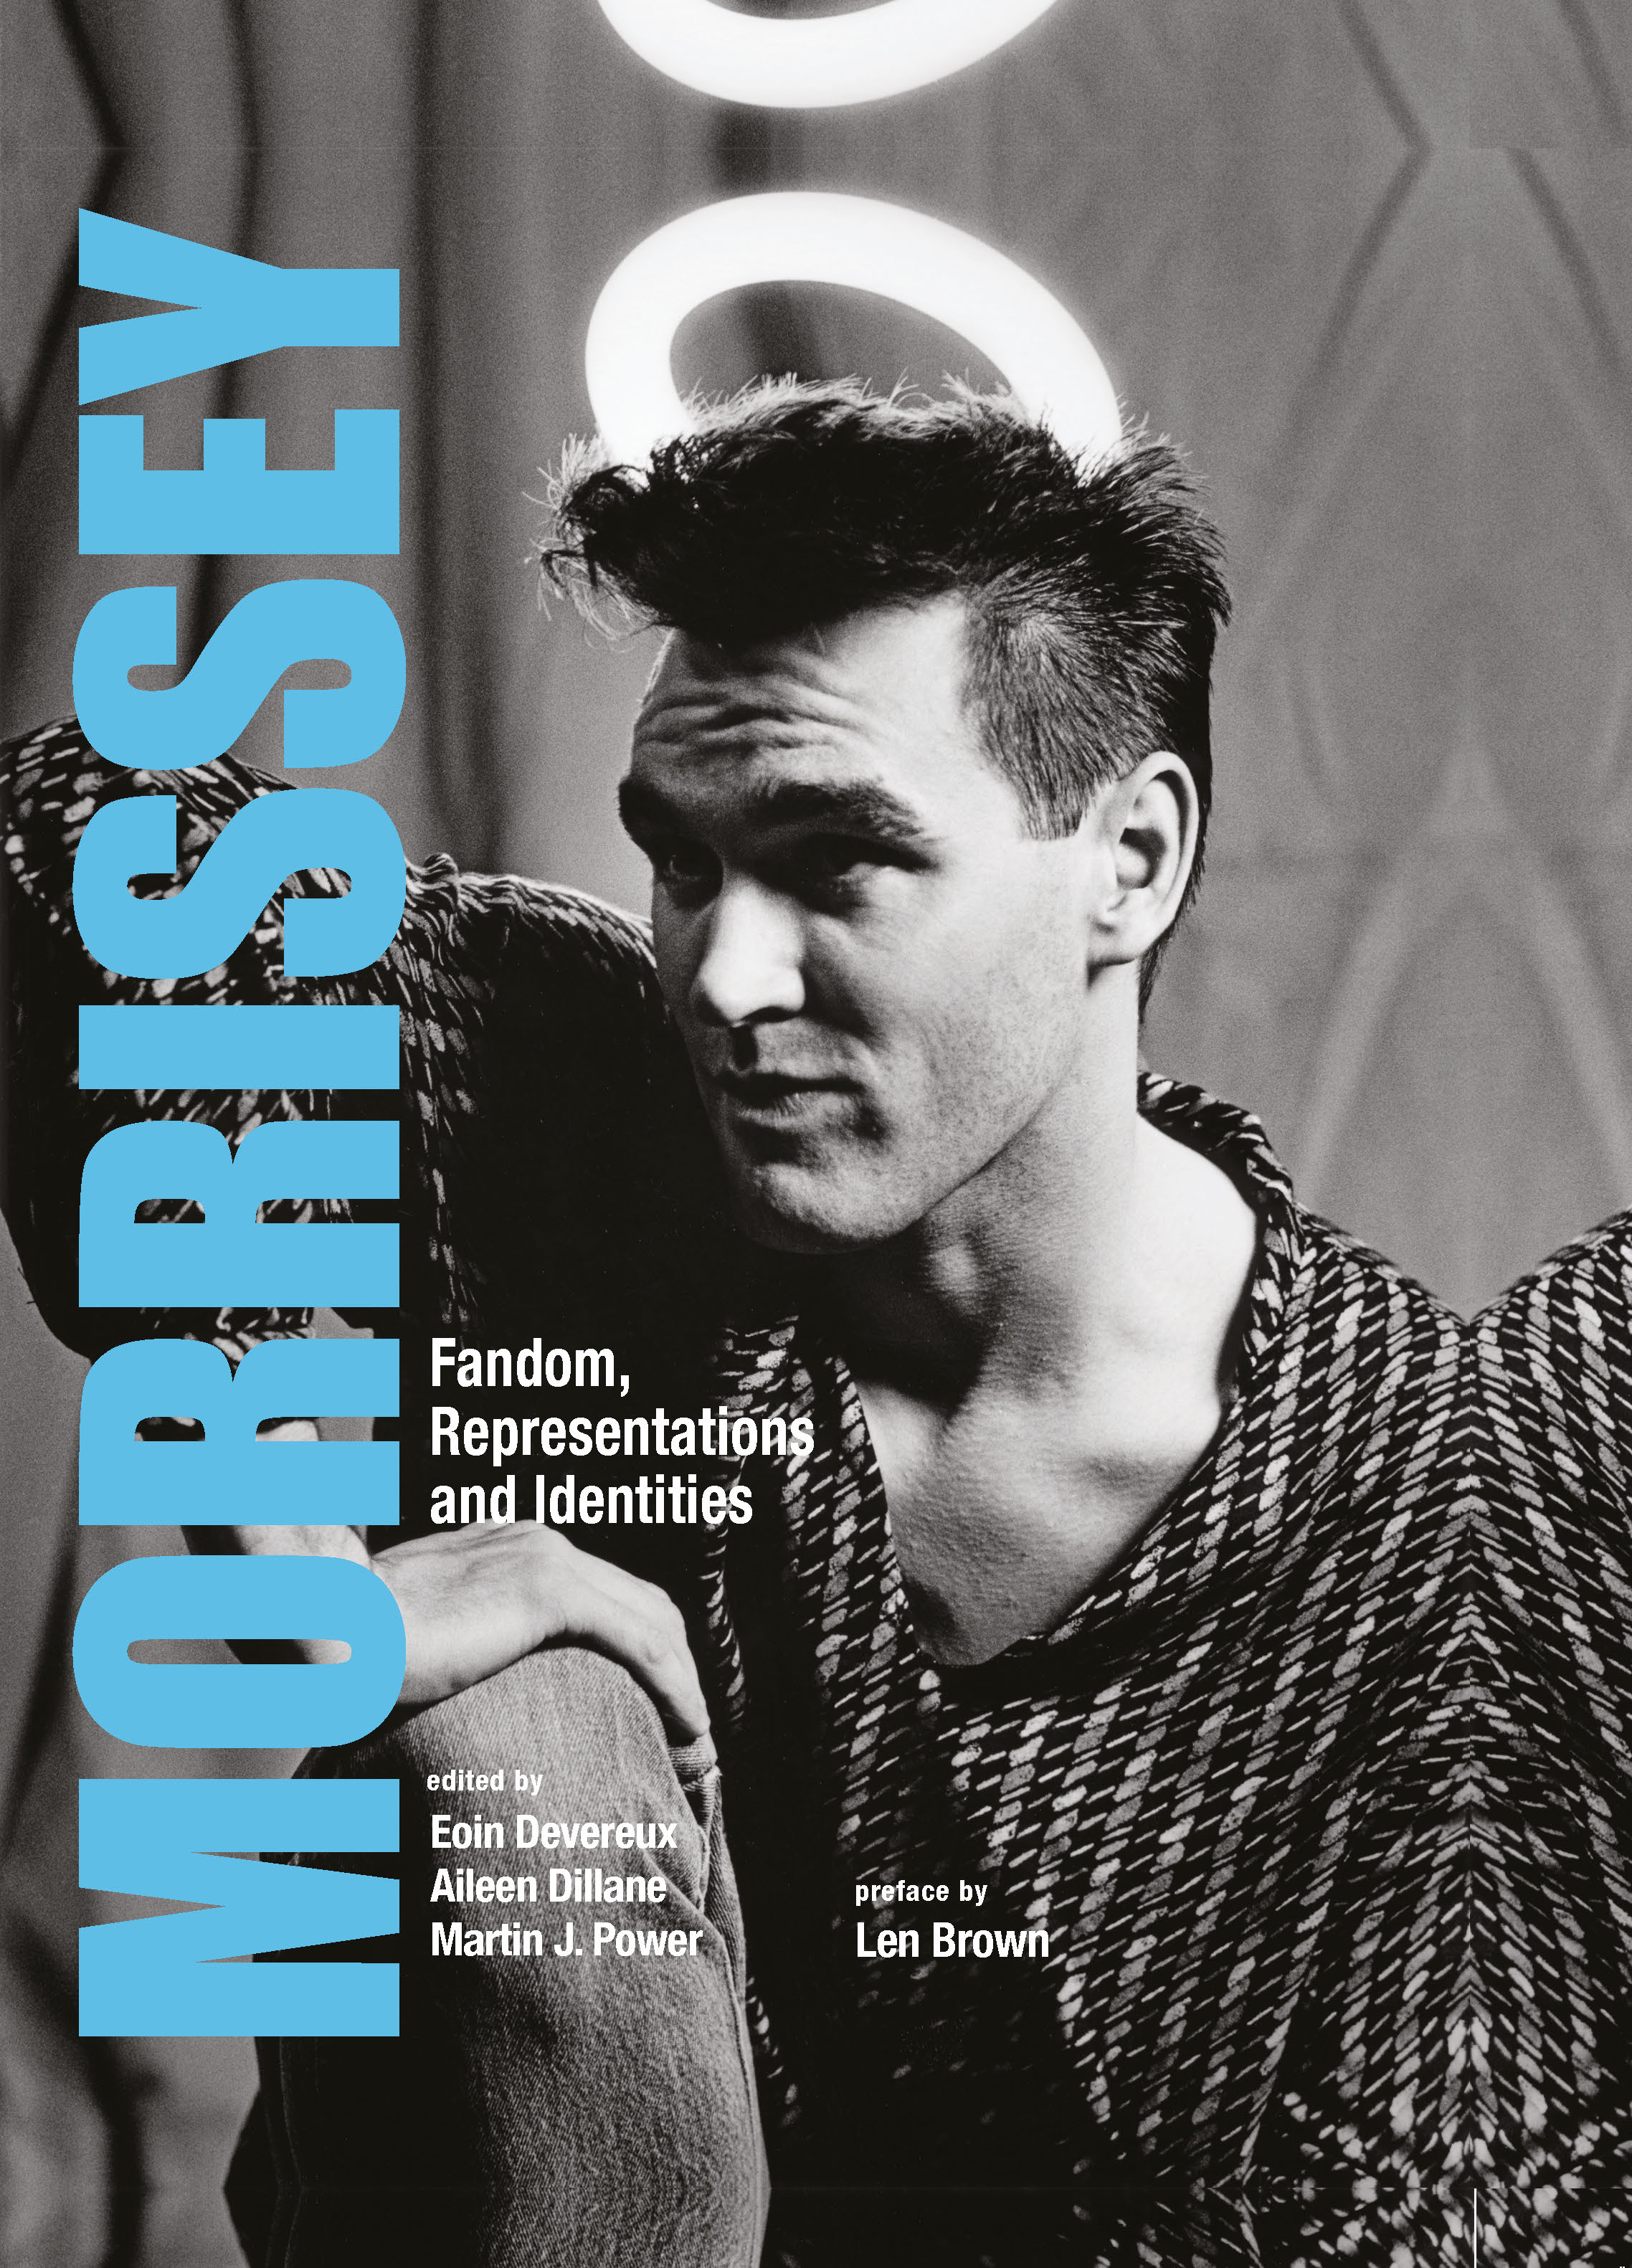 image of Morrissey